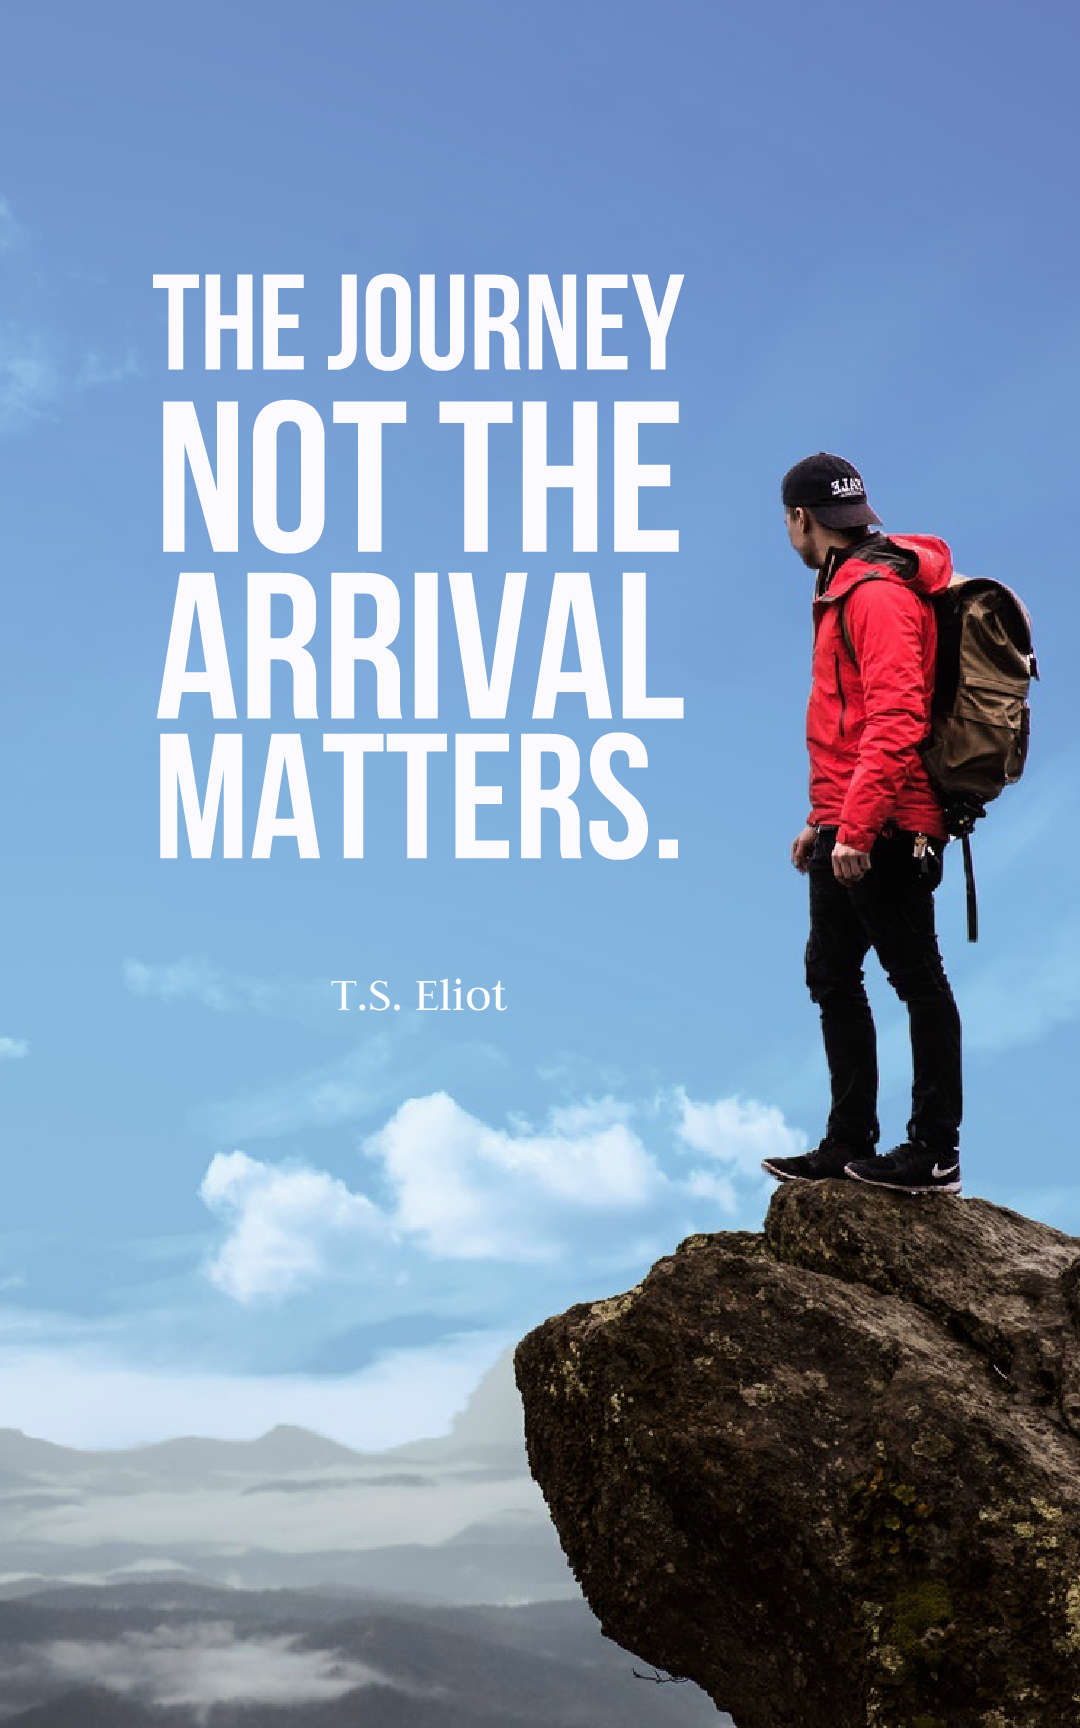 The journey not the arrival matters.